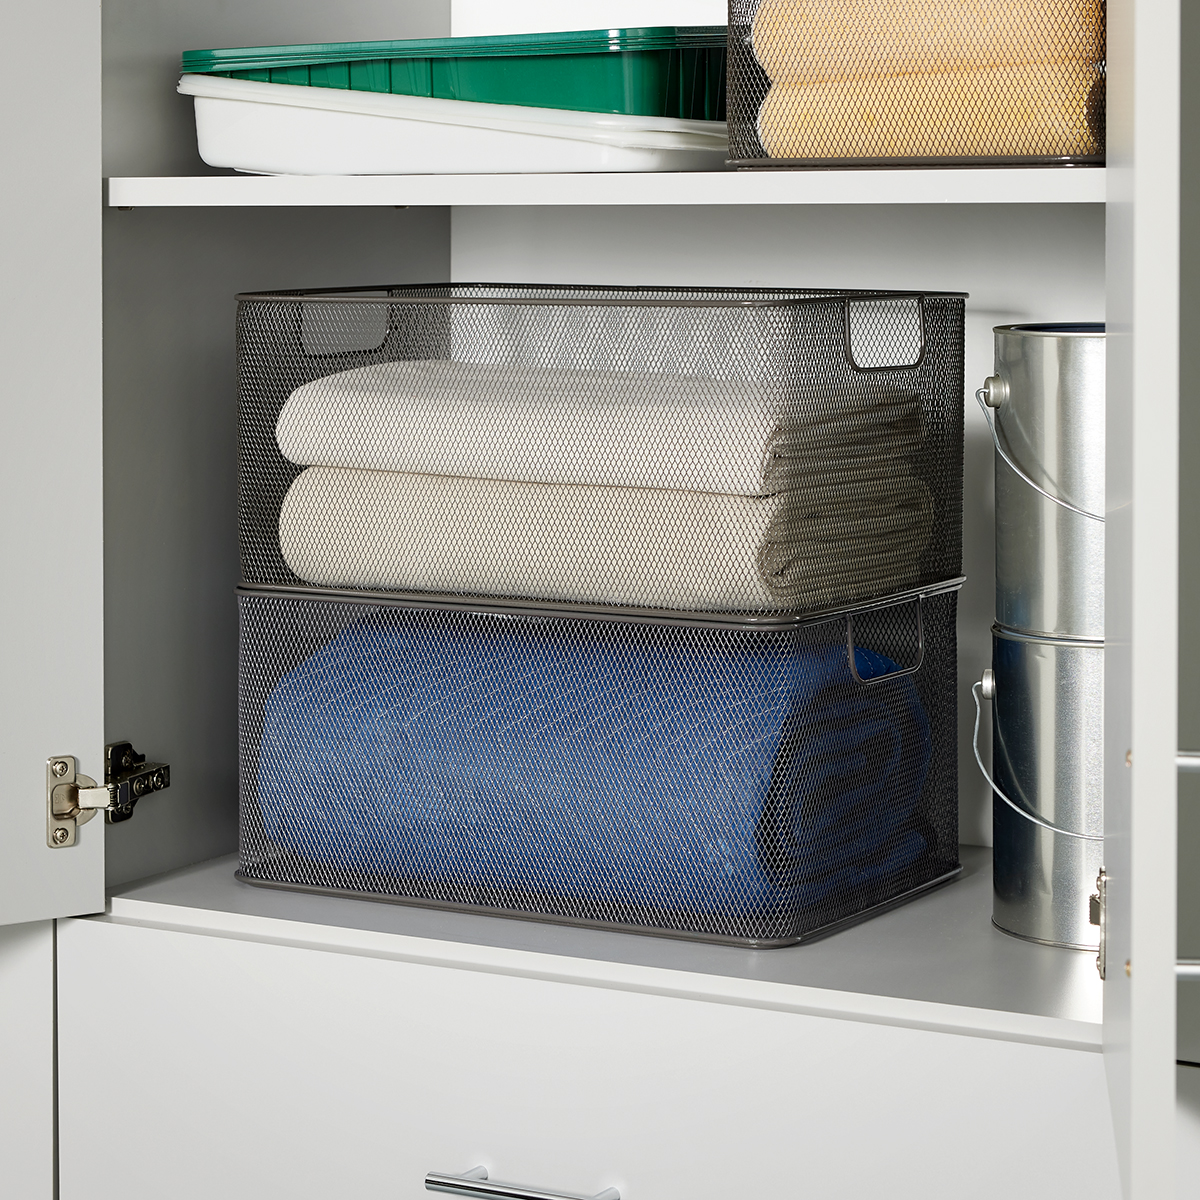 https://www.containerstore.com/catalogimages/477799/10090645-stacking-mesh-bin-graphite-.jpg